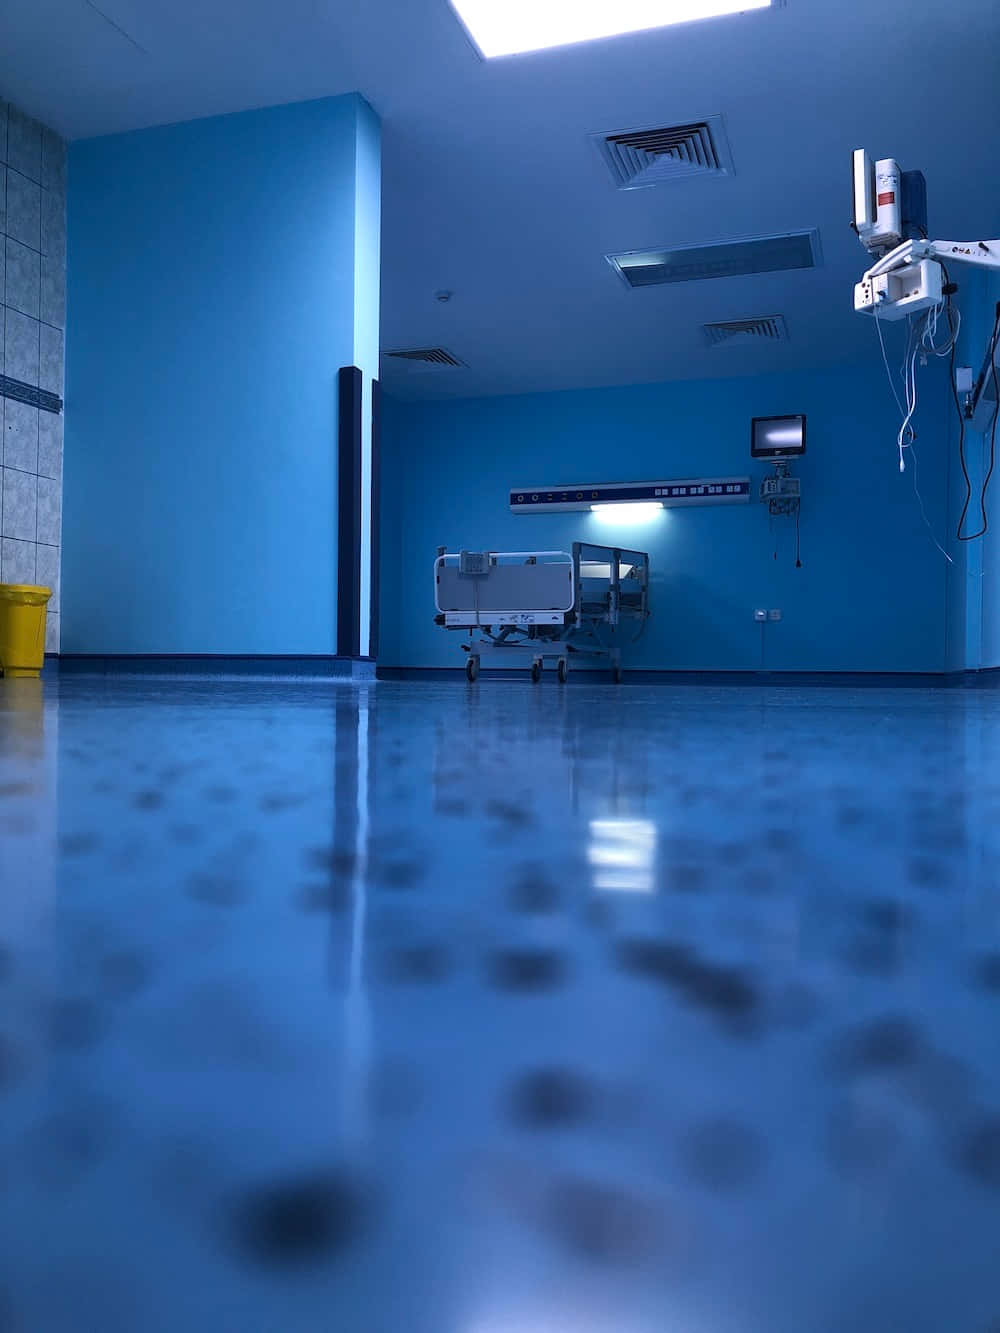 A Hospital Room With Blue Walls And A Bed